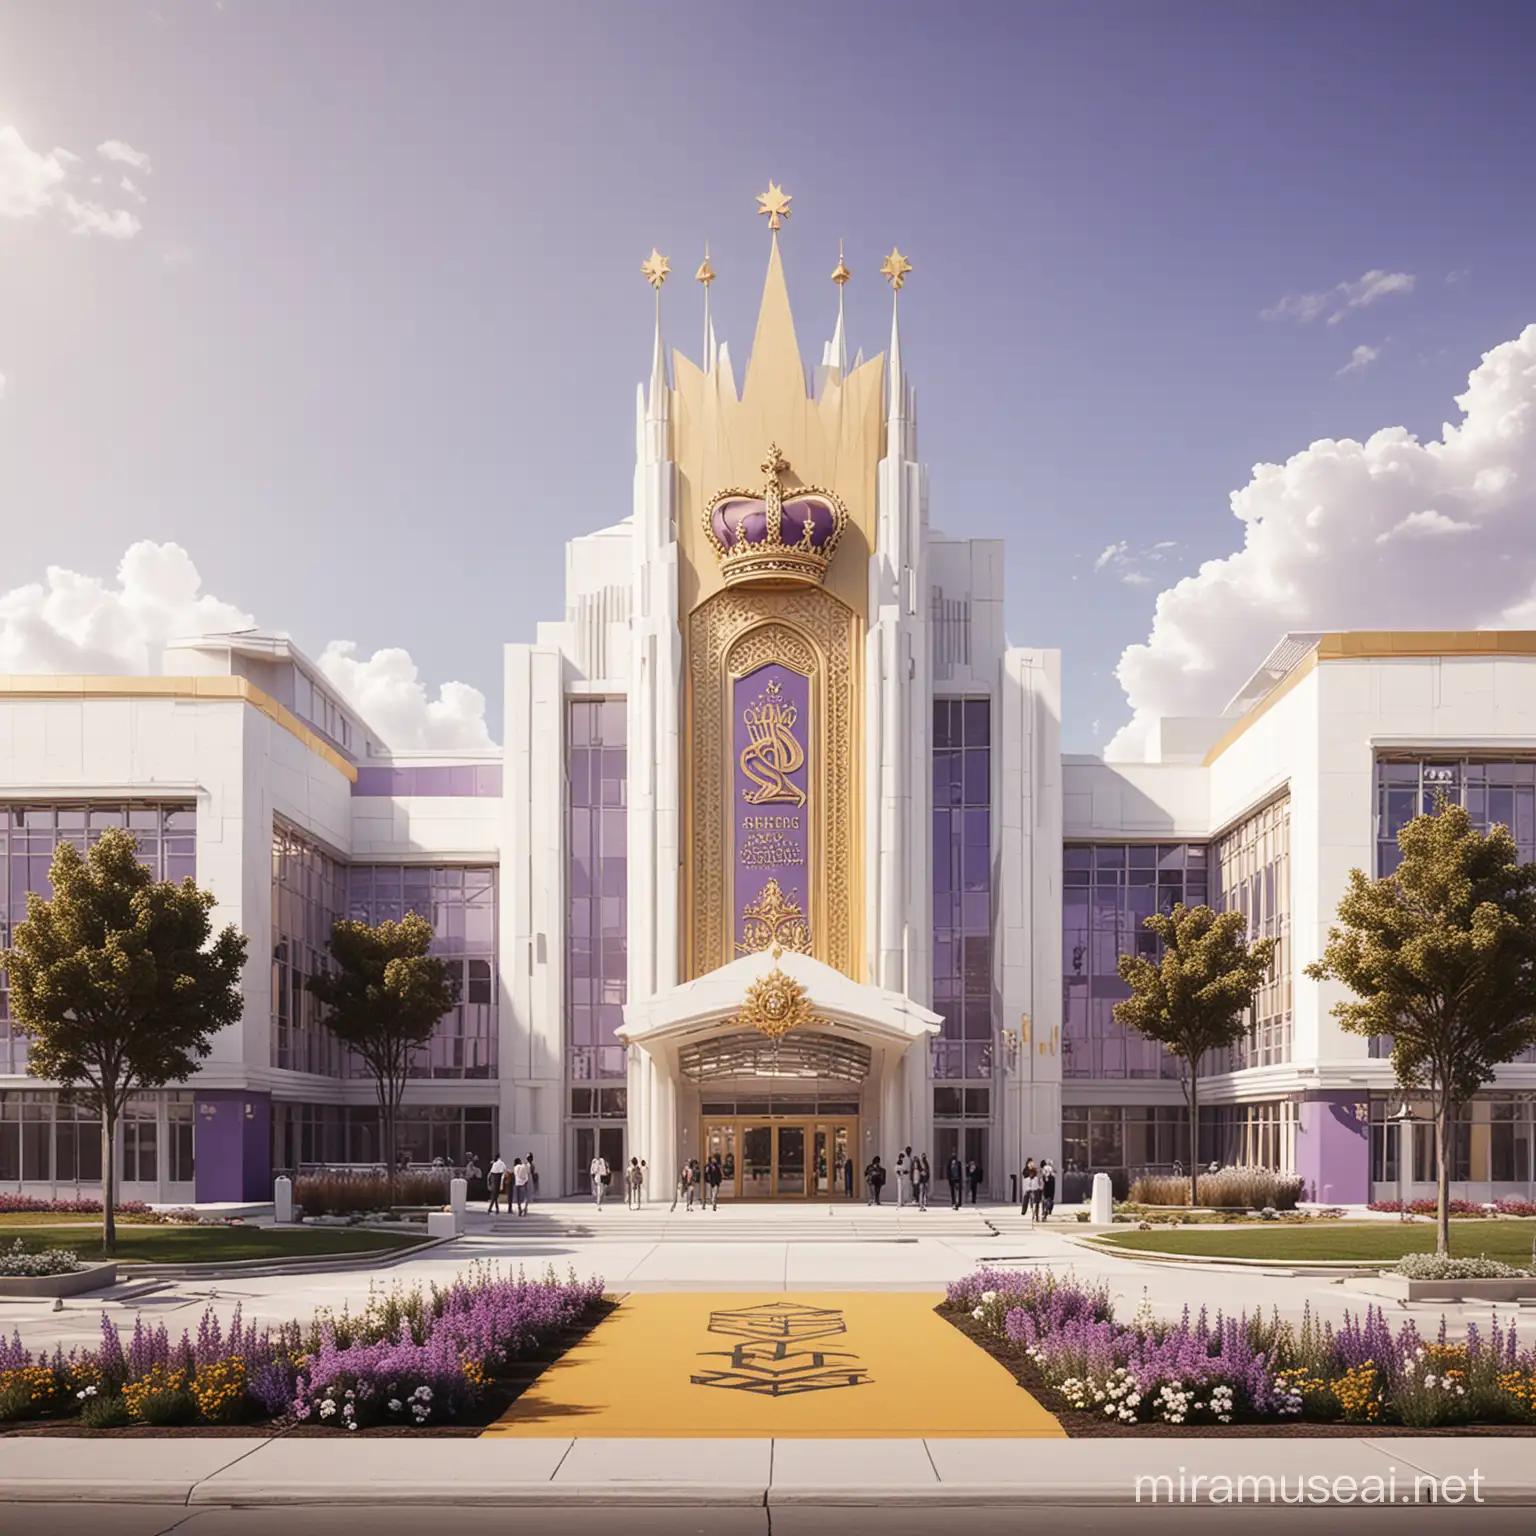 Futuristic High School with White Buildings and Royal Crown Sign